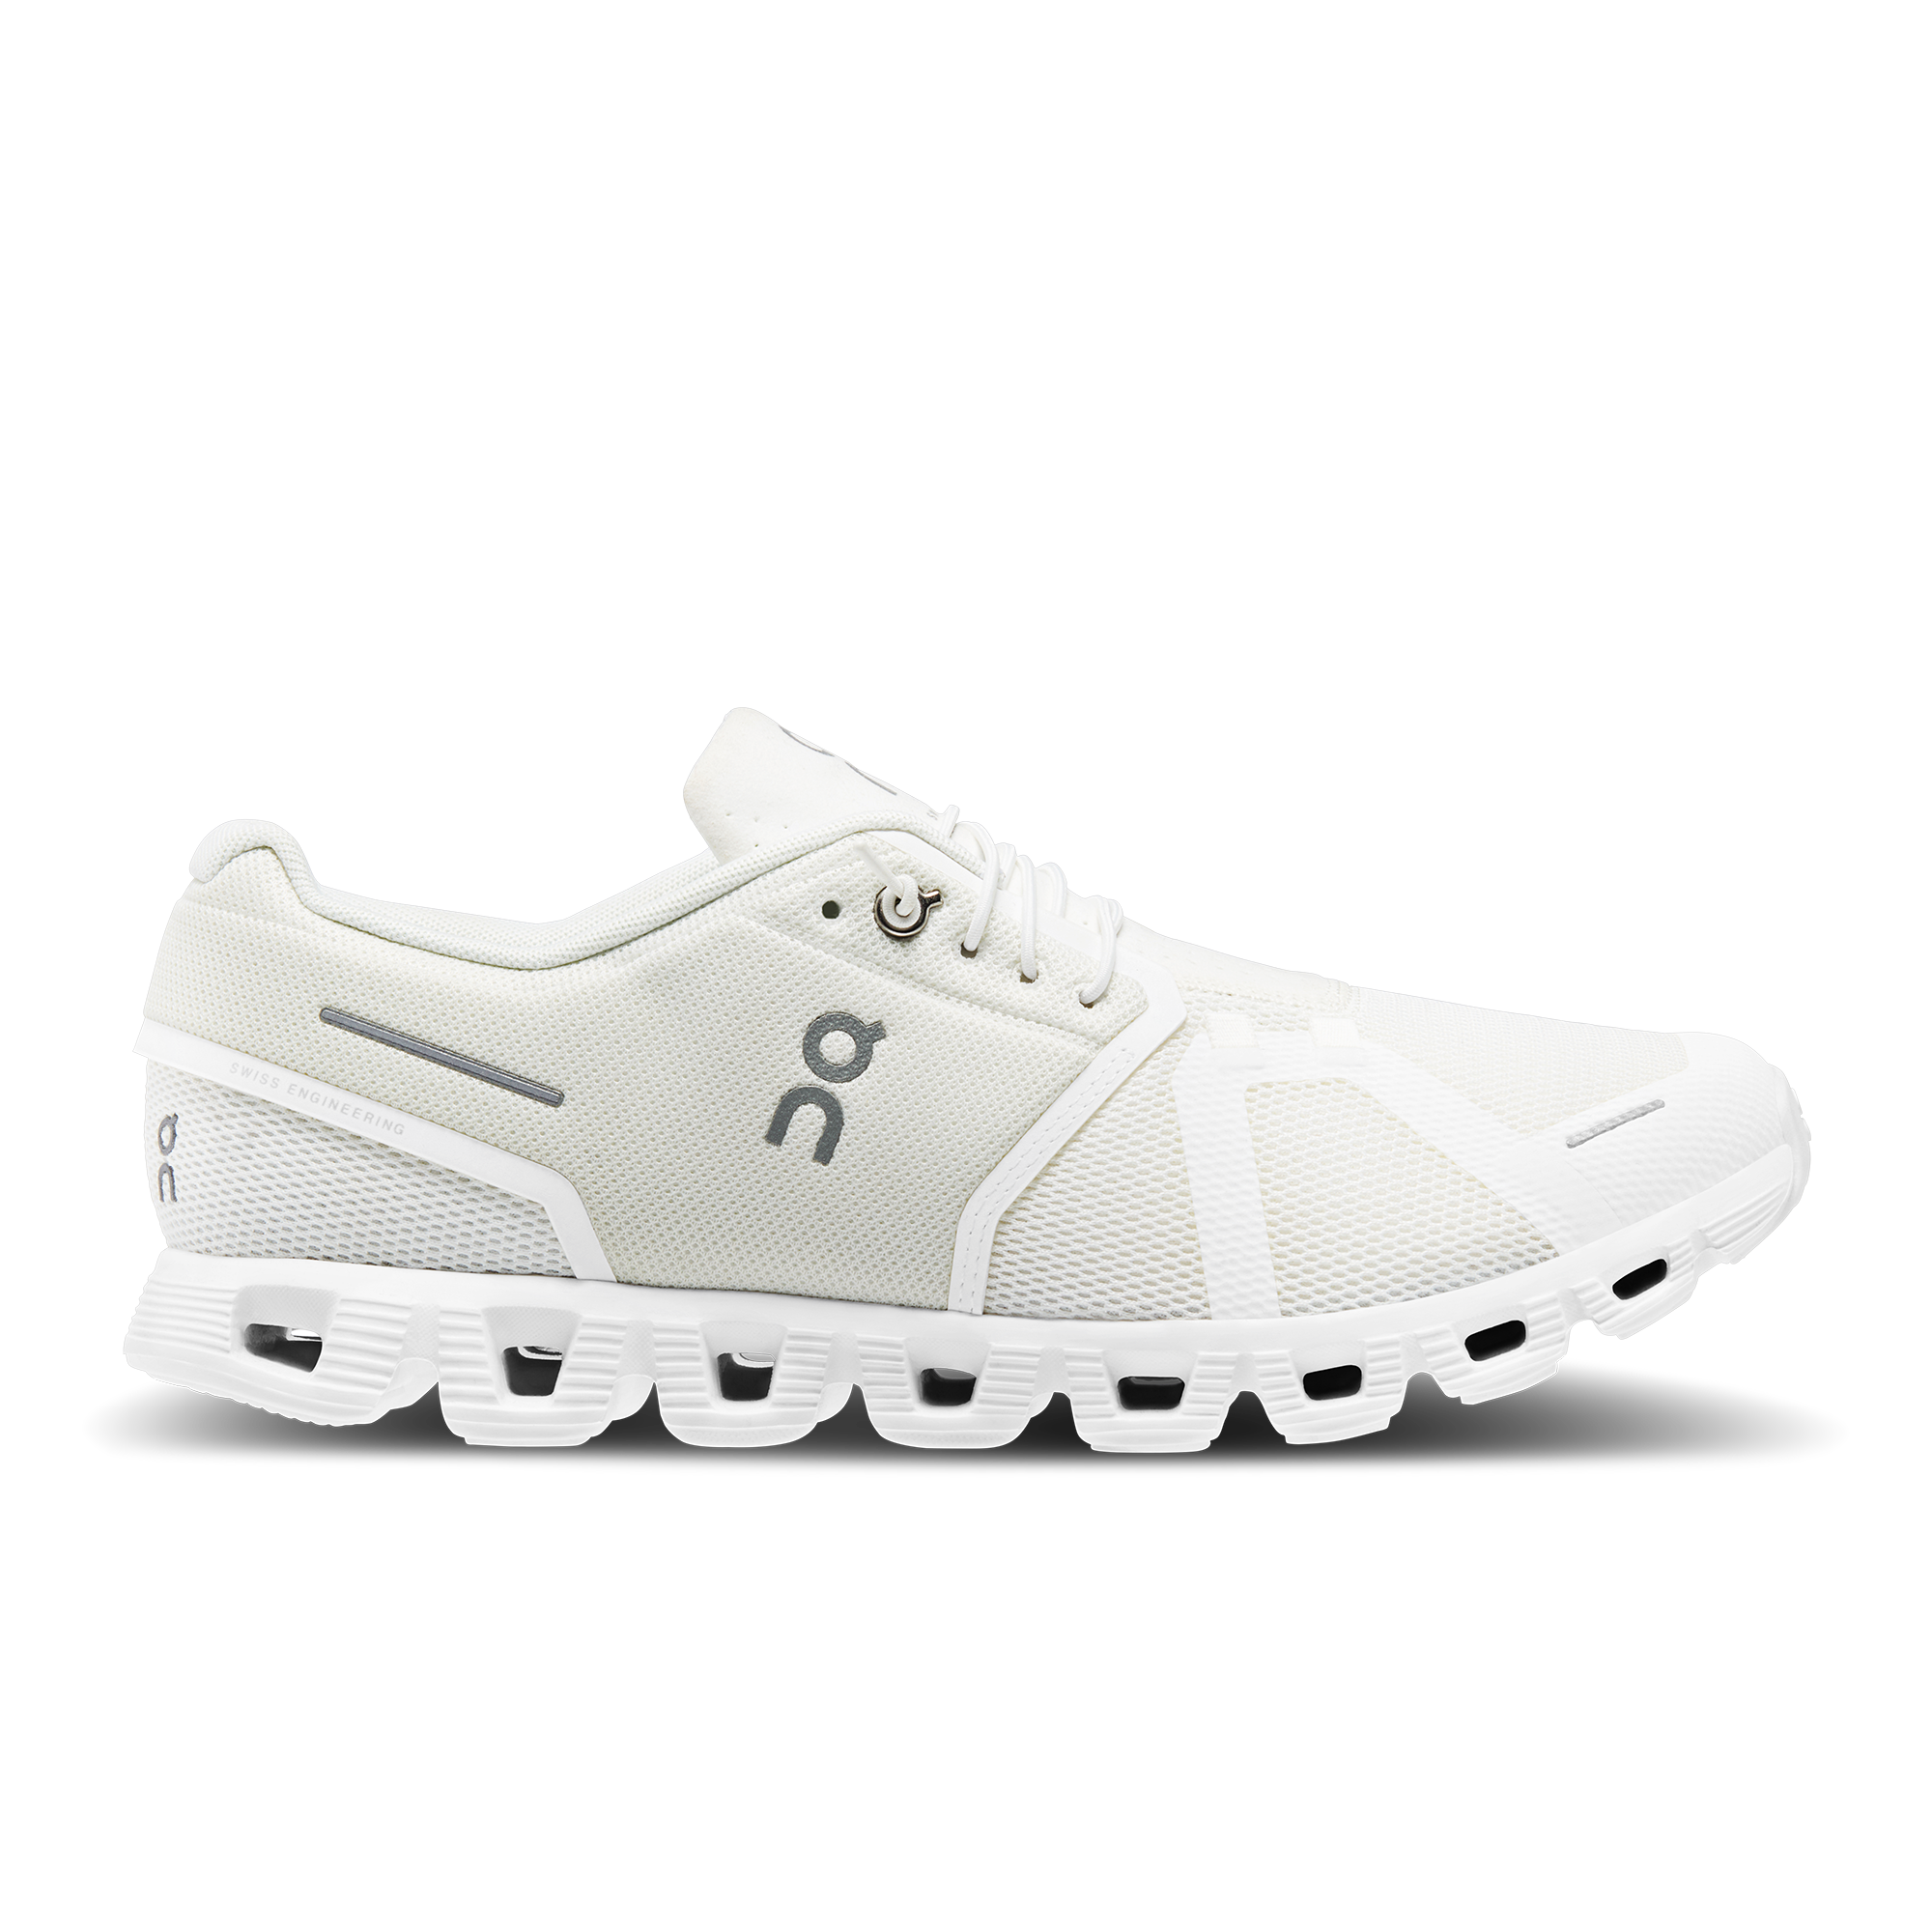 Lateral view of the Men's Cloud 5 by ON in the color Undyed White/White